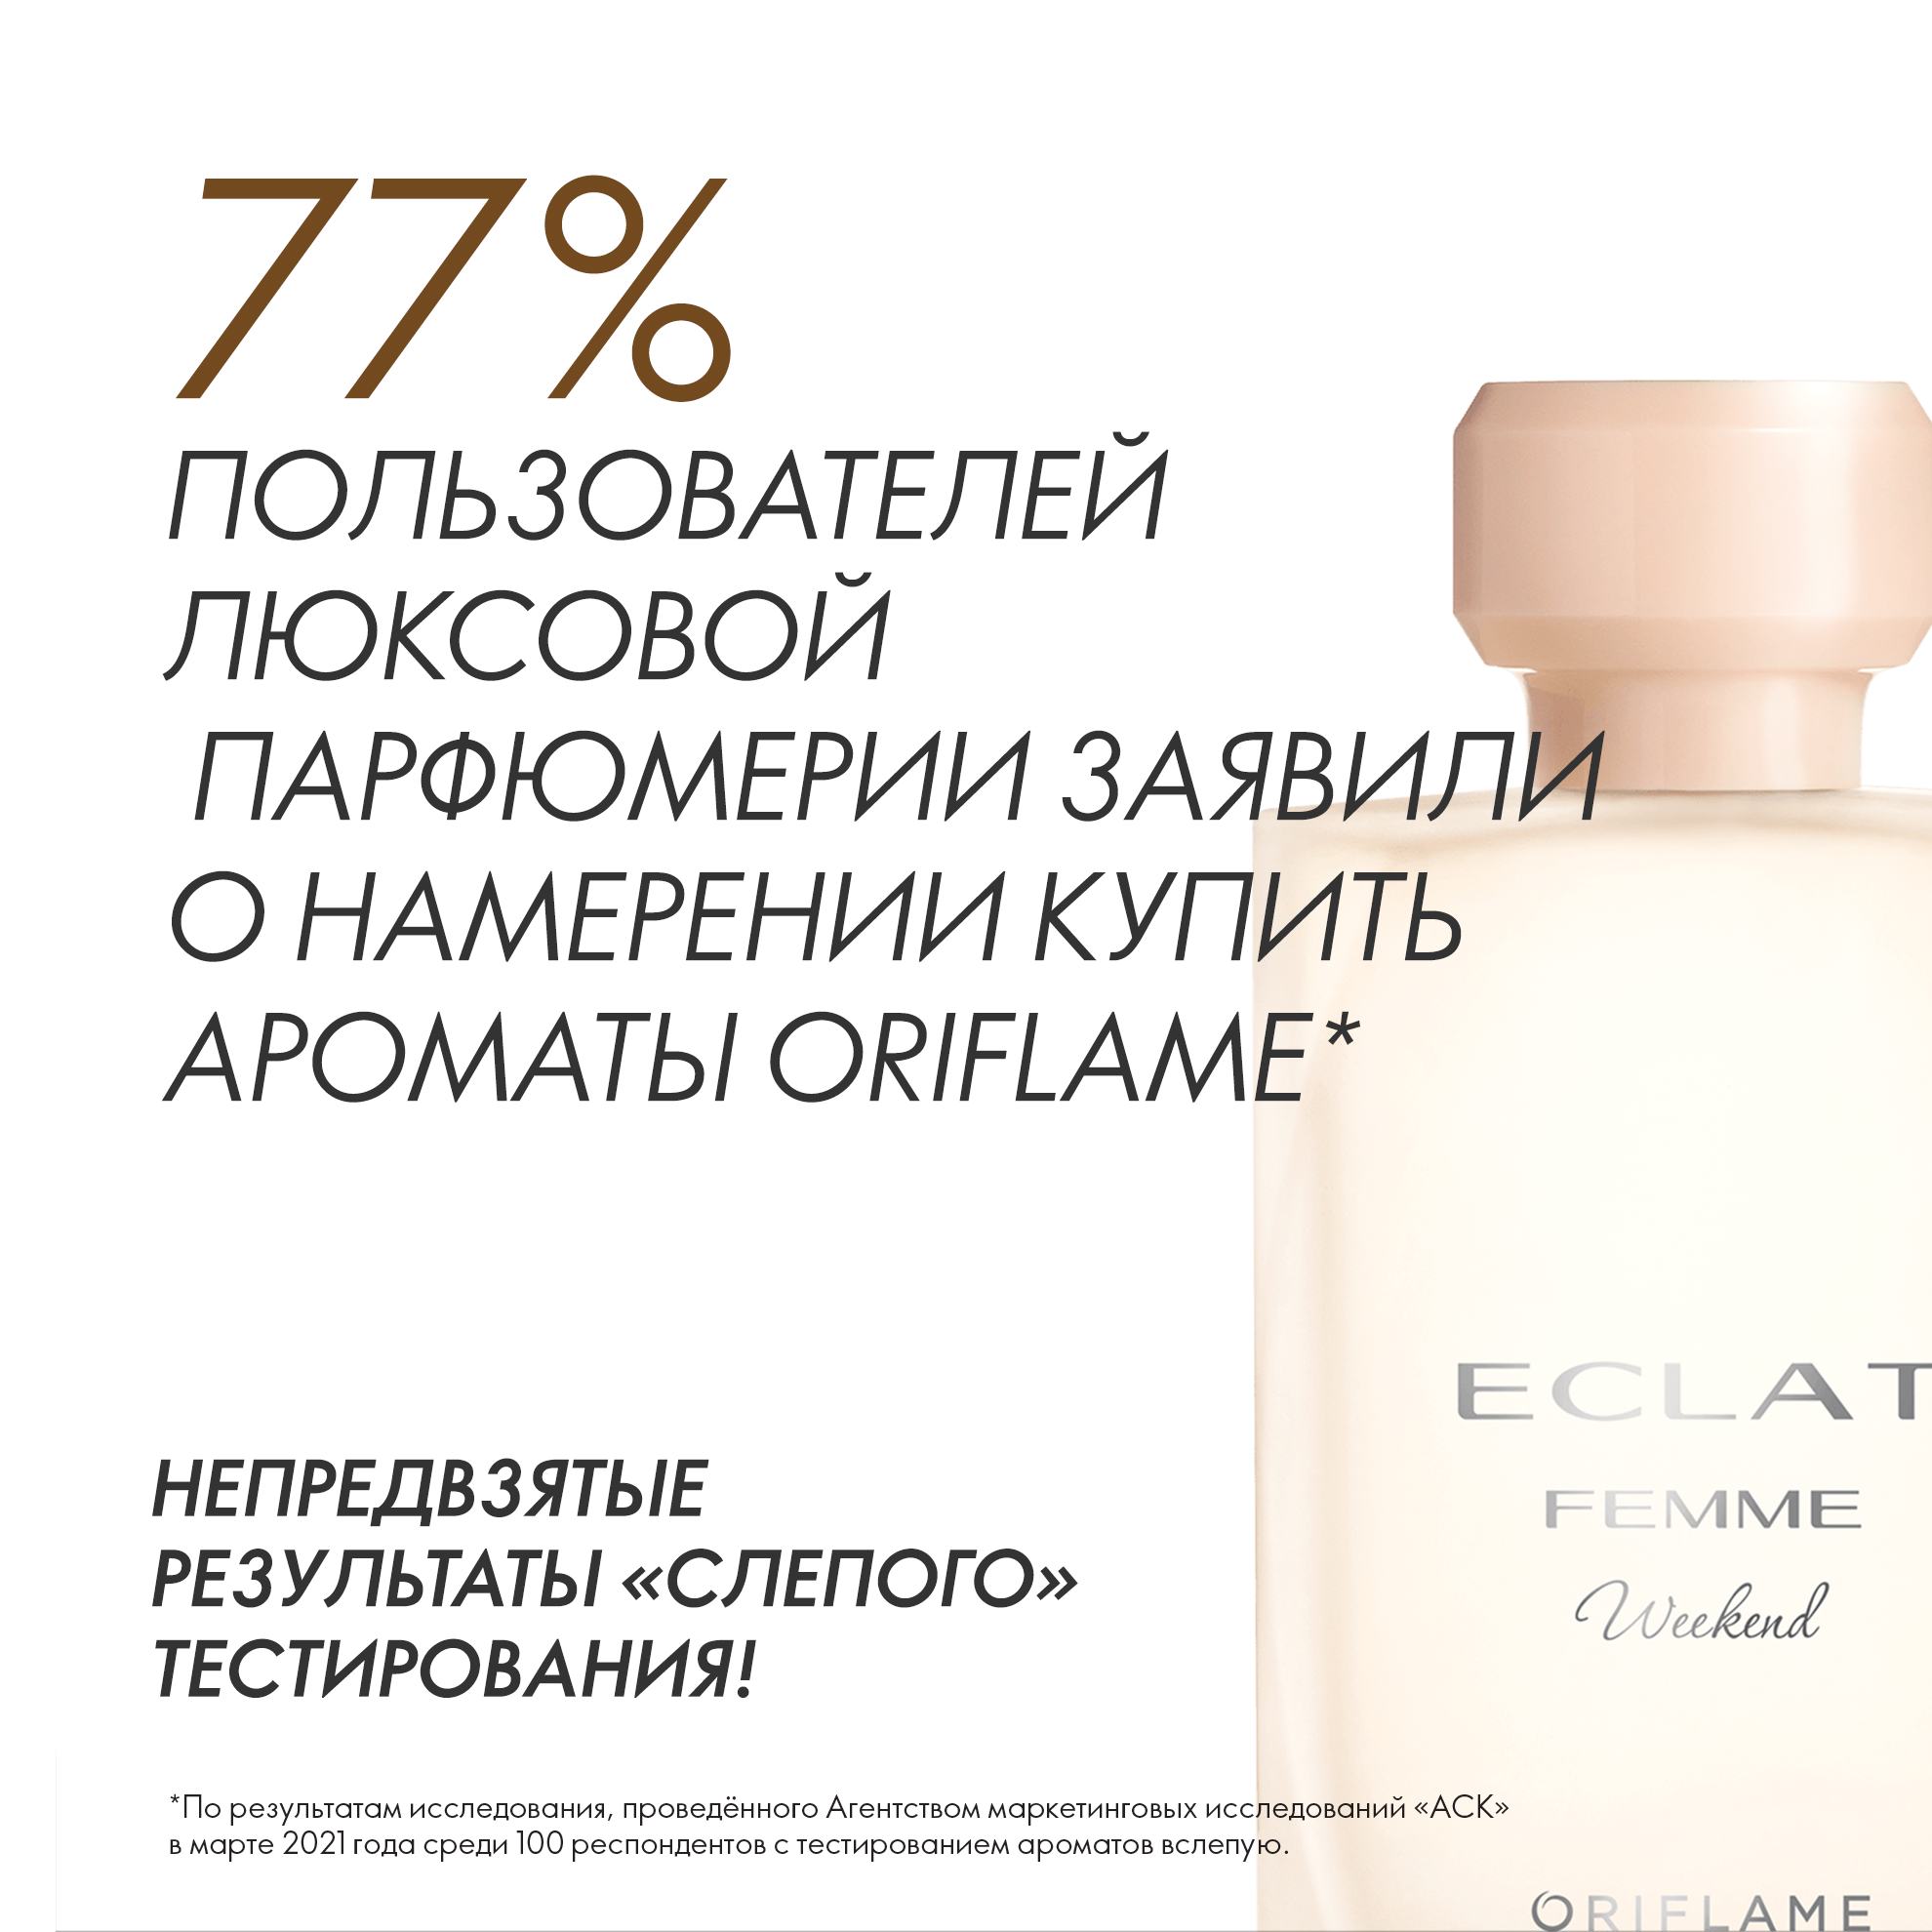 https://media-cdn.oriflame.com/productImage?externalMediaId=product-management-media%2fProducts%2f42499%2fRU%2f42499_4.png&id=15414338&version=1